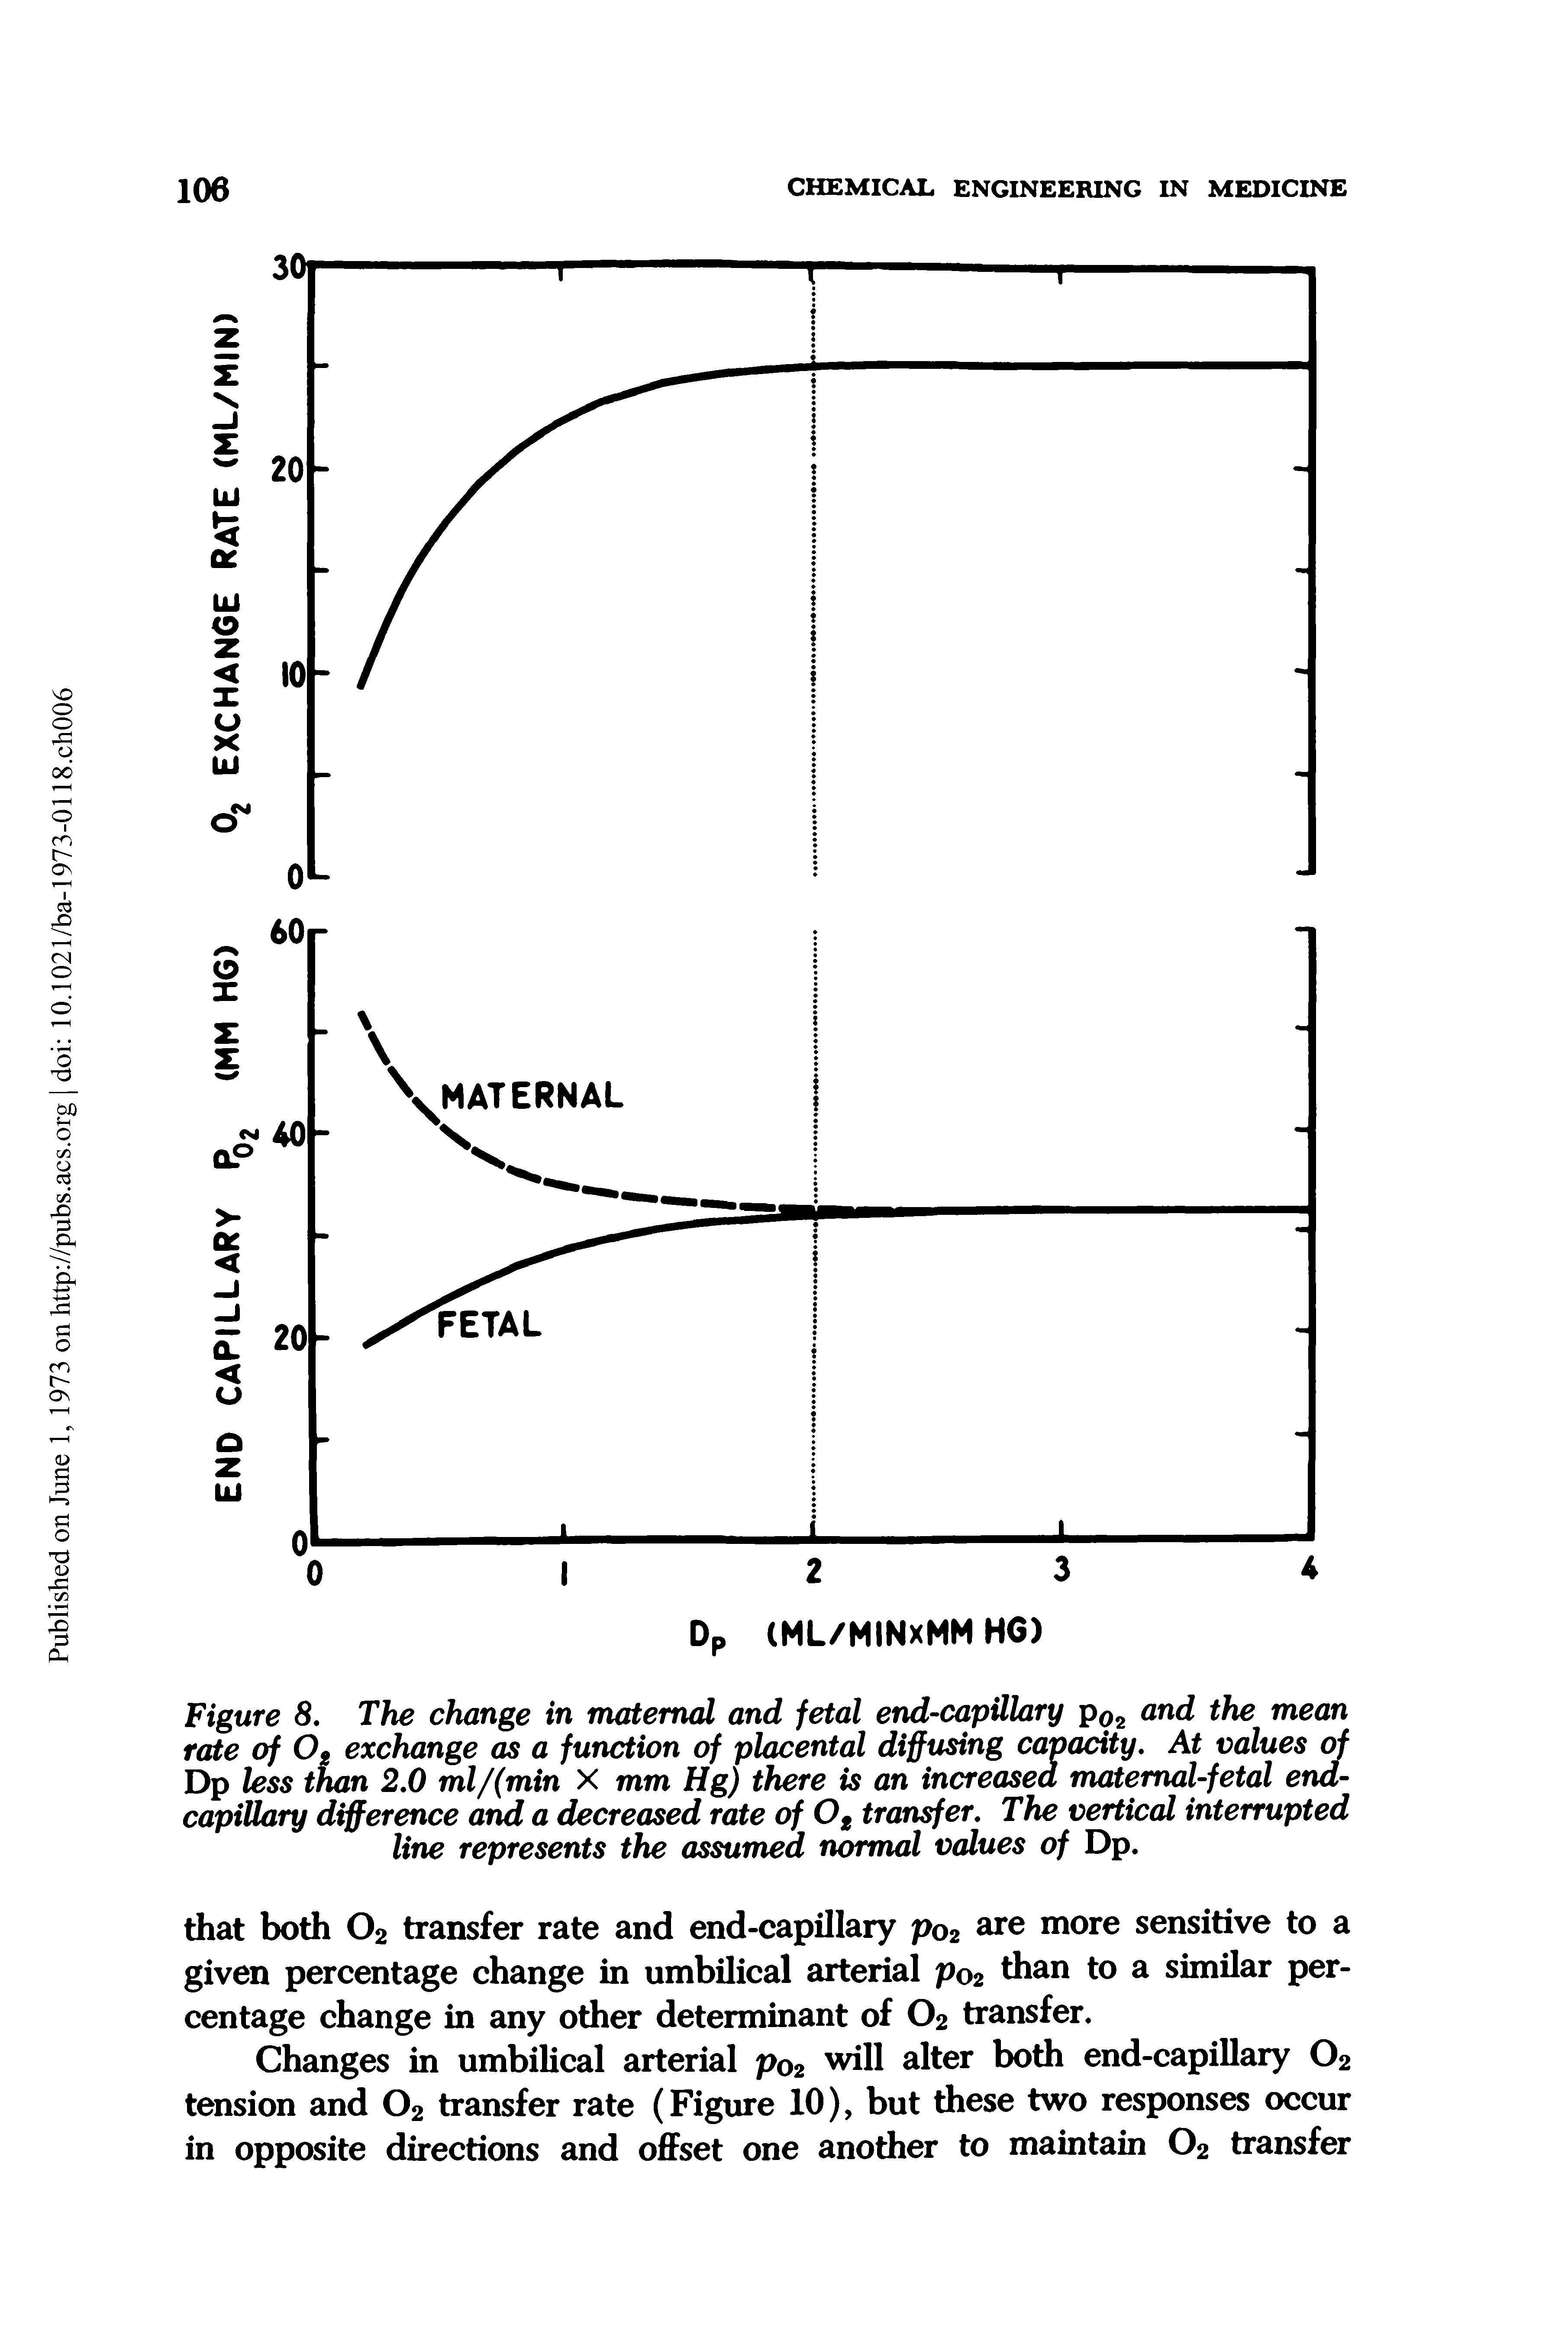 Figure 8. The change in maternal and fetal end-capillary p02 and the mean rate of O, exchange as a function of placental diffusing capacity. At values of Dp less than 2.0 ml/(min X mm Hg) there is an increased maternal-fetal ena-capillary difference and a decreased rate of Ot transfer. The vertical interrupted line represents the assumed normal values of Dp.